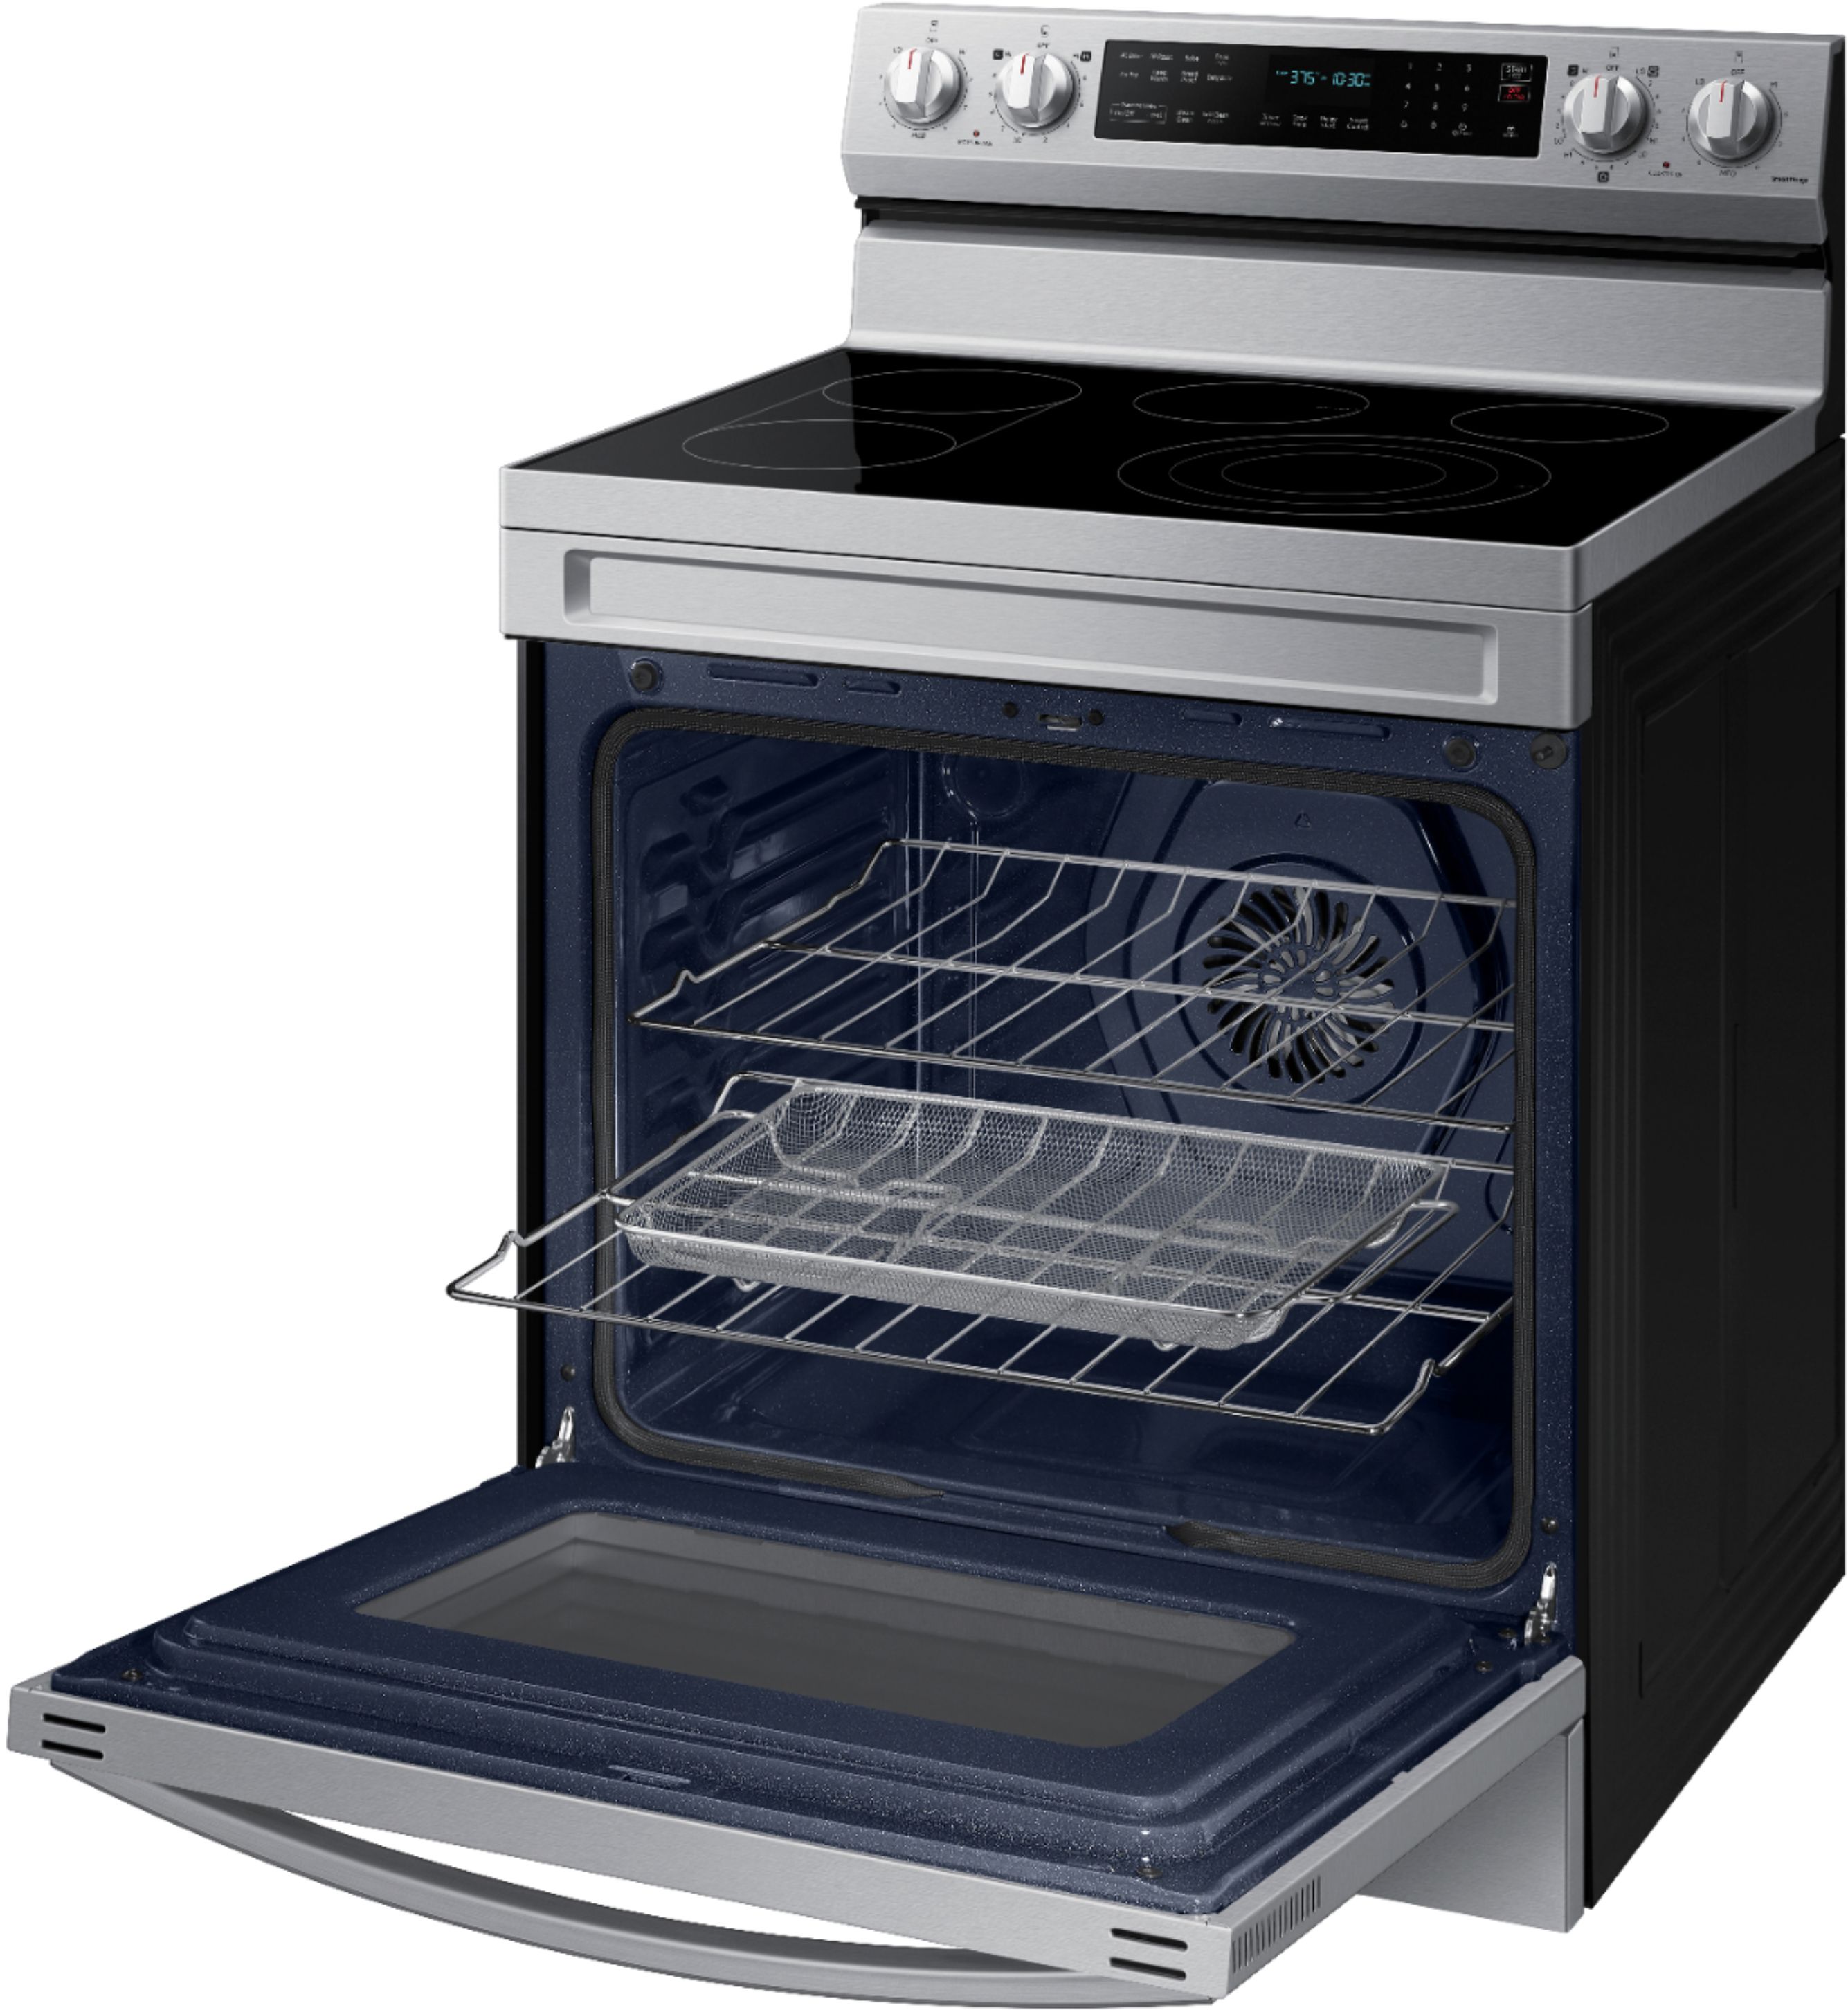 Samsung 6.3 cu. ft. Freestanding Electric Range with WiFi and Steam Clean  Stainless Steel NE63A6111SS/AA - Best Buy